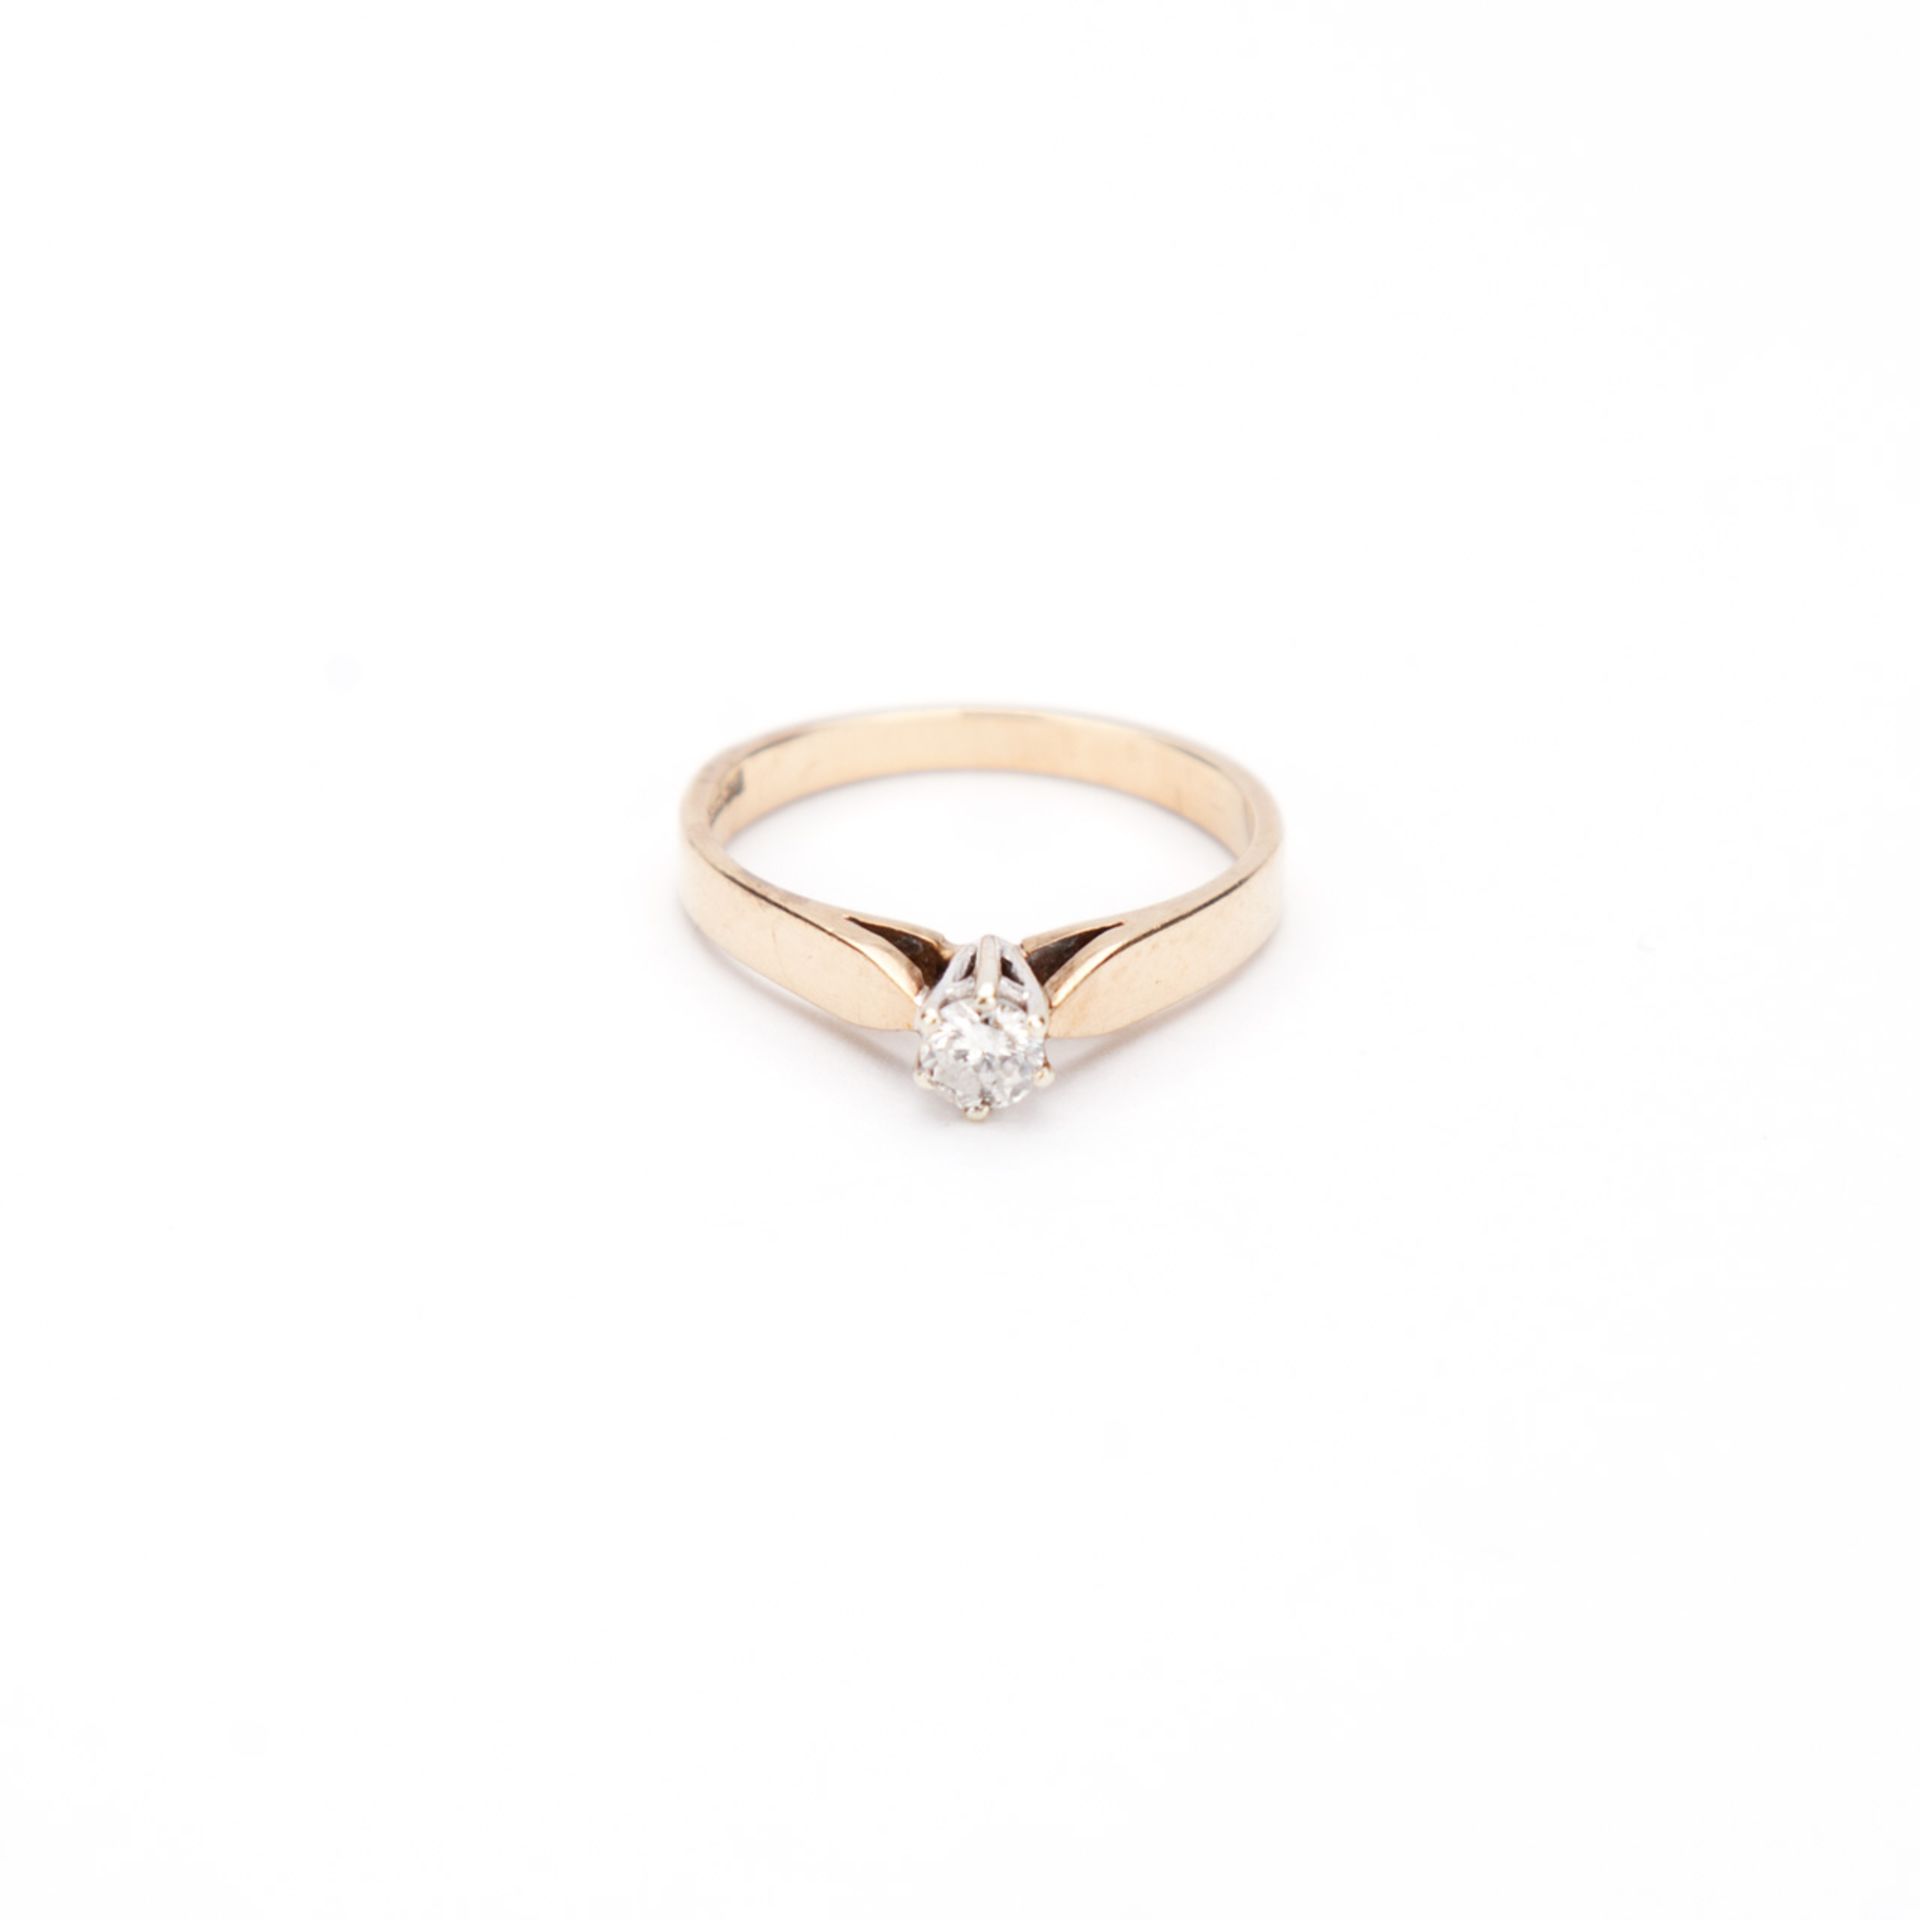 Gold 9ct Ring - Diamond Soltaire in Claw Setting/Knife Edge Shoulders